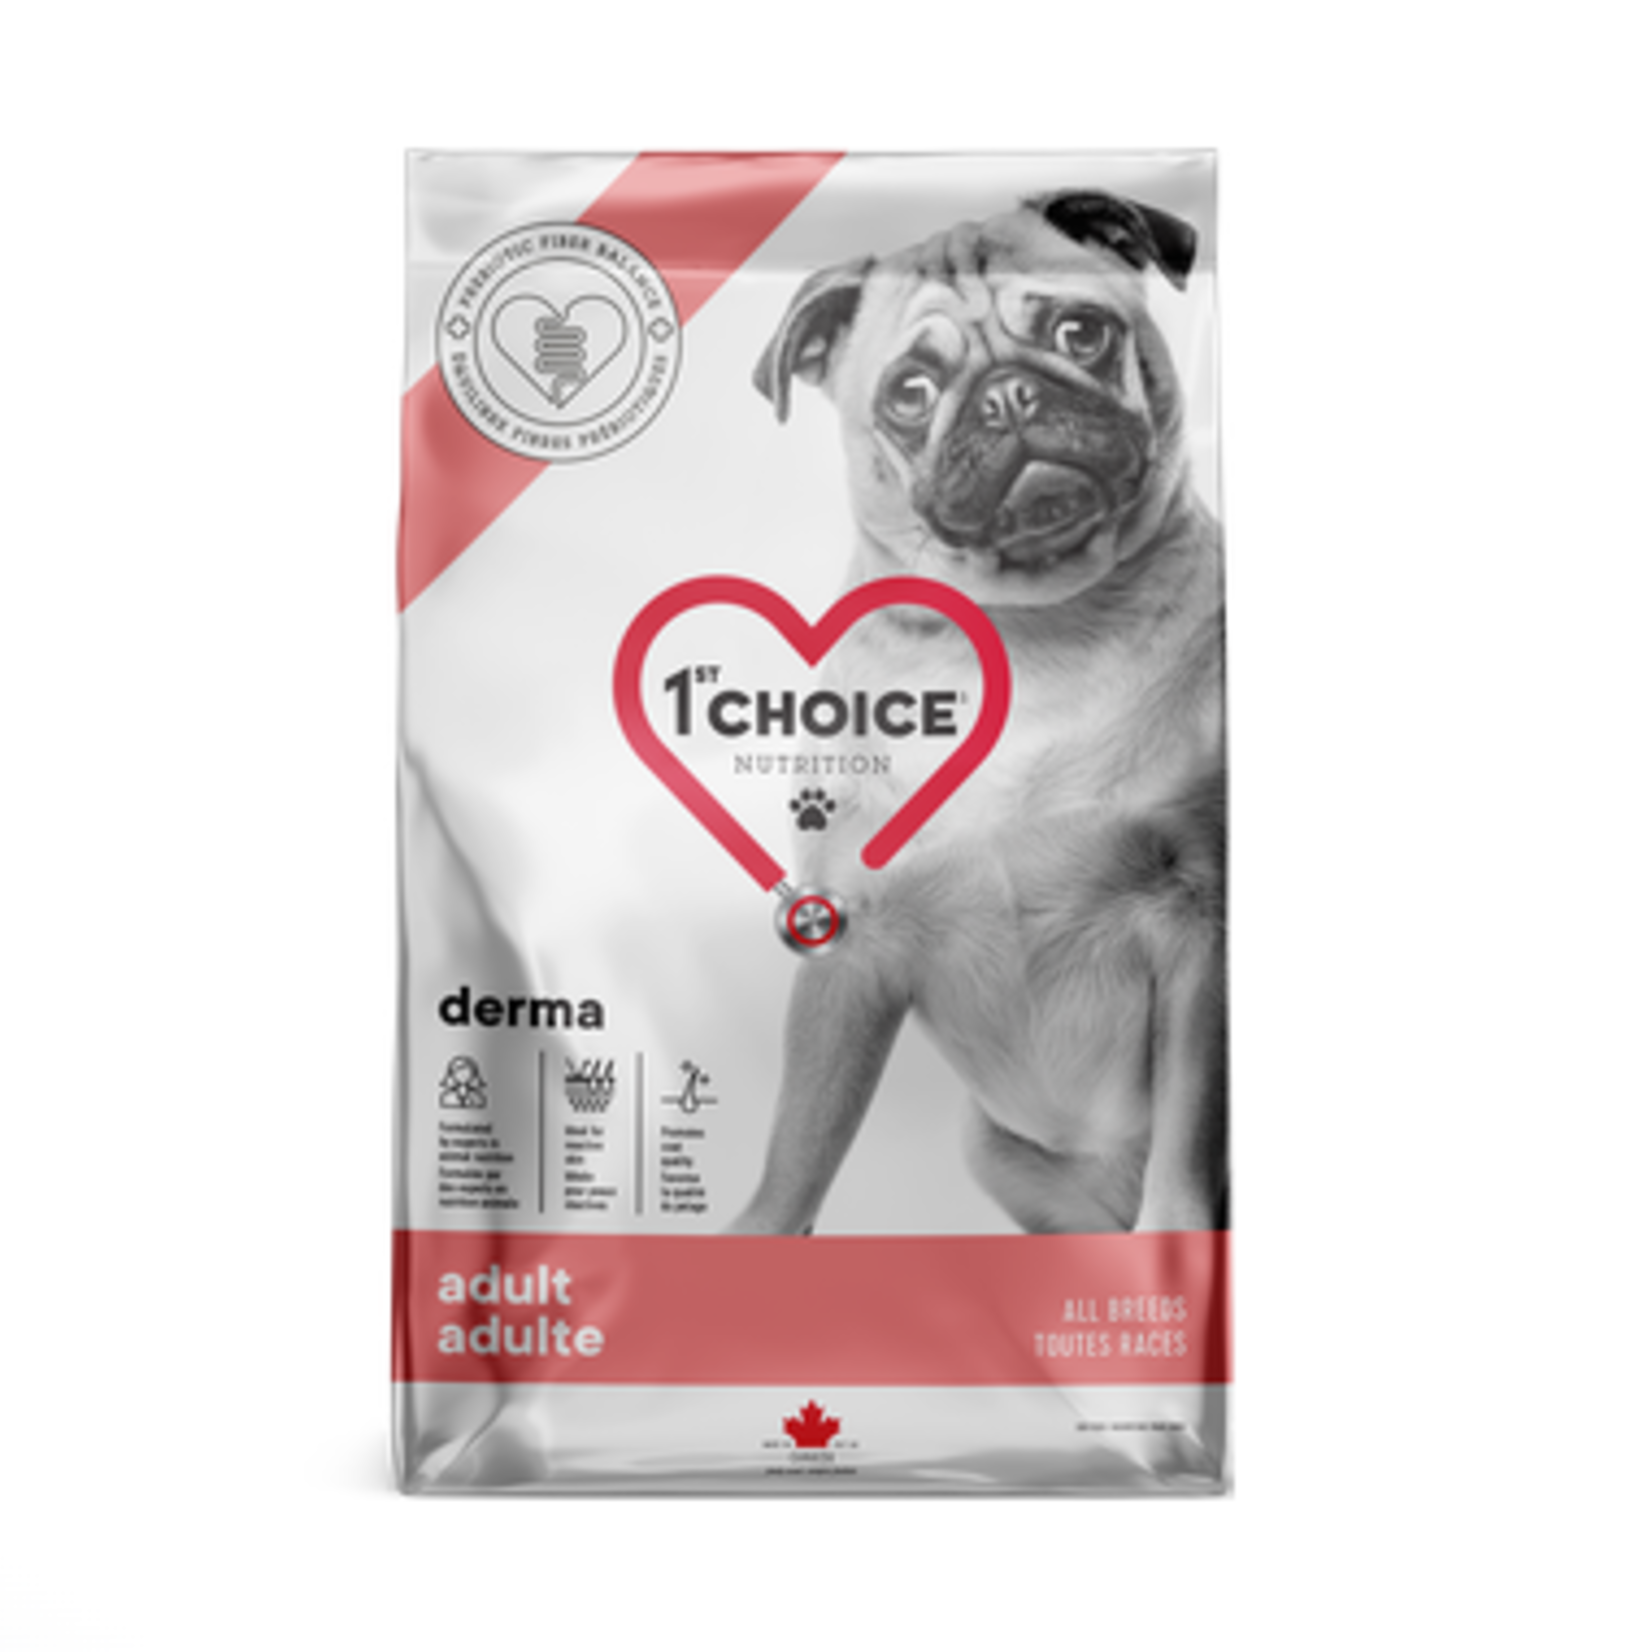 1st Choice Derma - All Breeds - G Free - Adult - 4.4 lbs